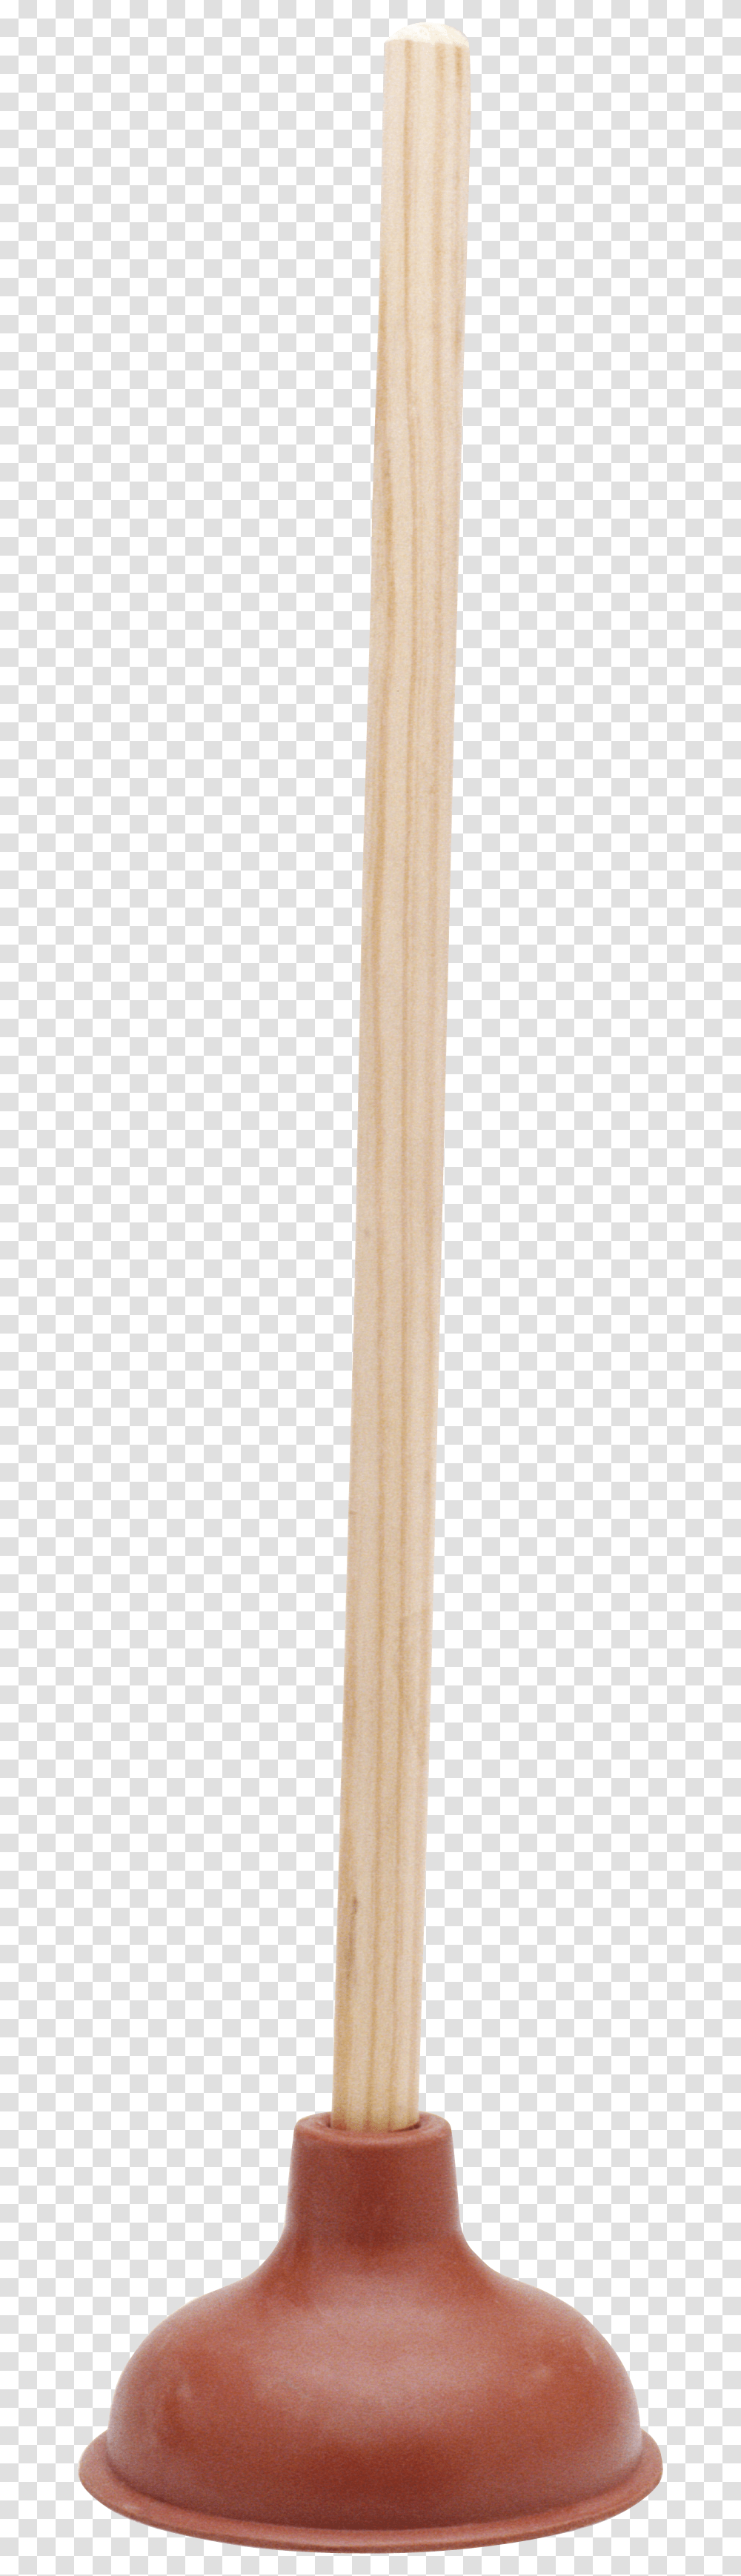 Plunger, Tool, Cutlery, Hammer, Spoon Transparent Png